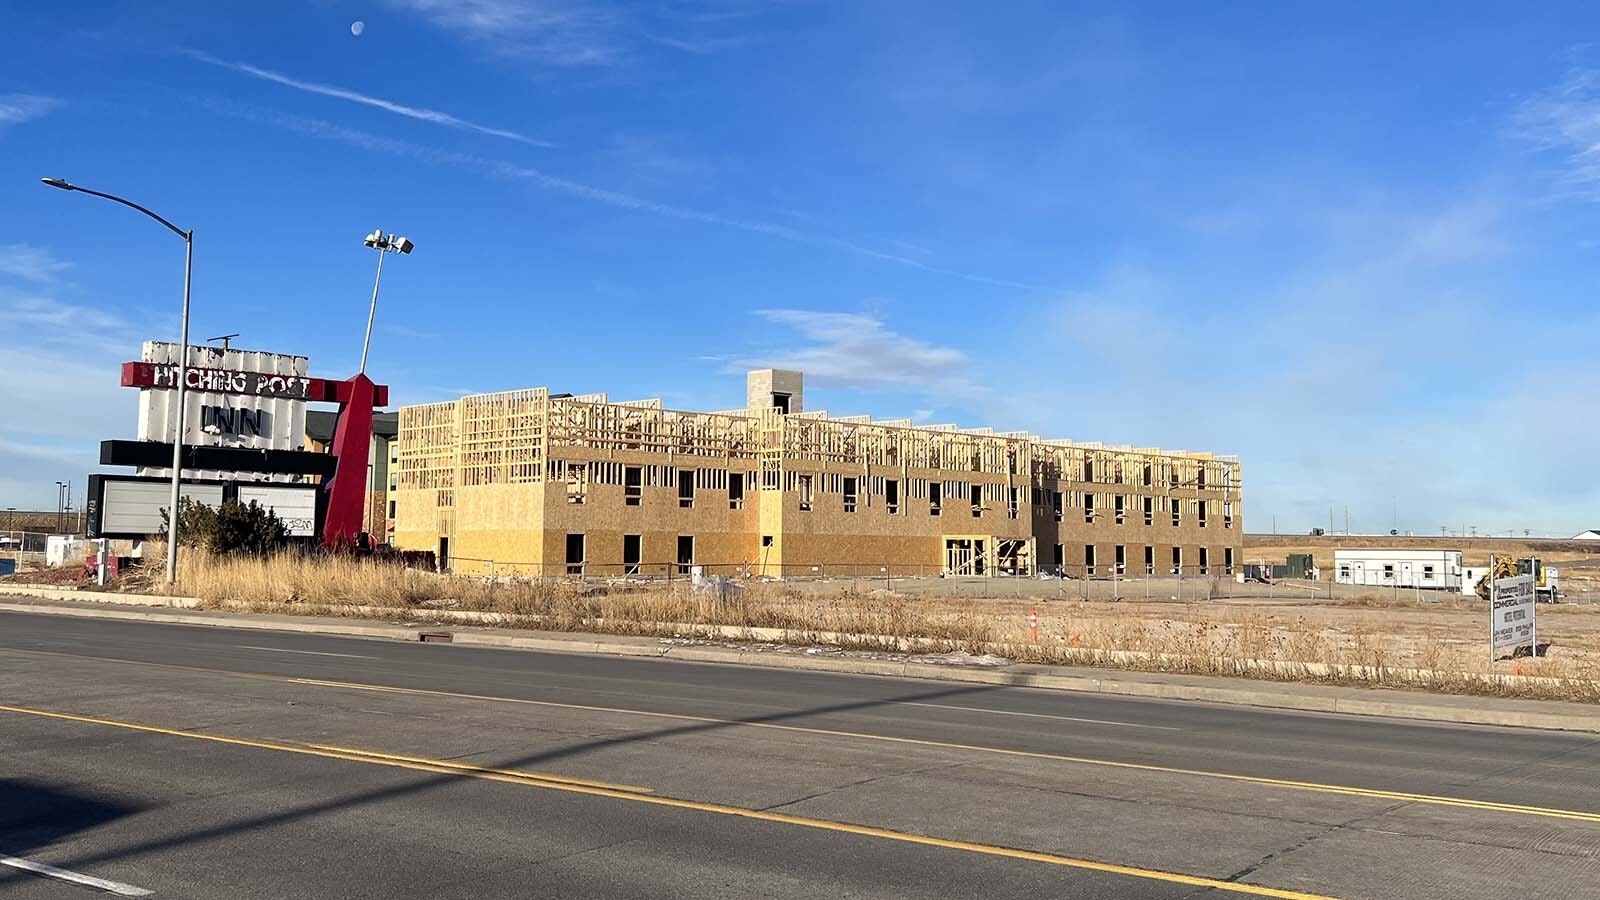 Work is progressing on one of two new hotels on the site of the historic Hitching Post Inn in Cheyenne.